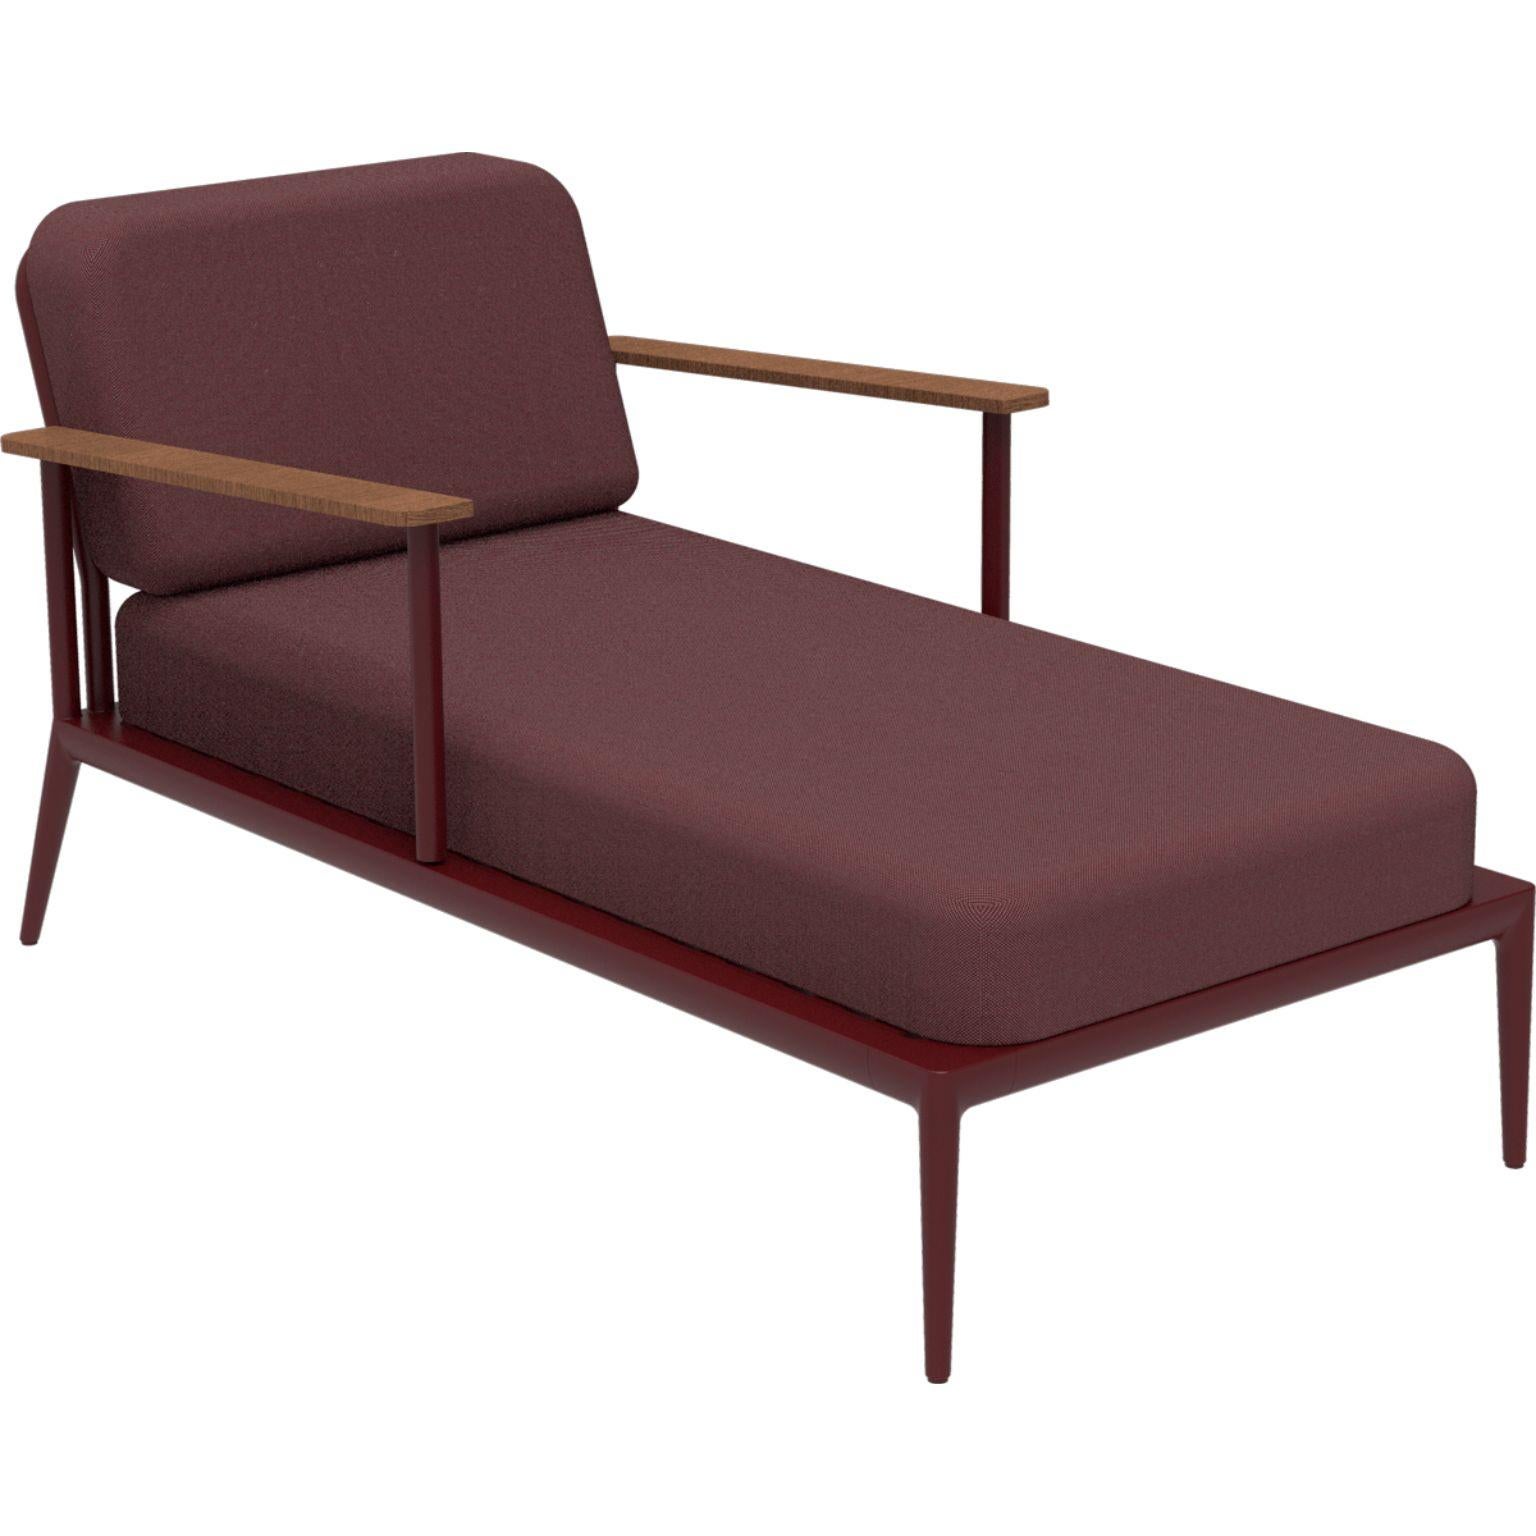 Nature Burgundy Divan by MOWEE
Dimensions: D155 x W83 x H81 cm (seat height 42 cm).
Material: Aluminum, upholstery and Iroko wood.
Weight: 30 kg.
Also available in different colors and finishes. Please contact us.

An unmistakable collection